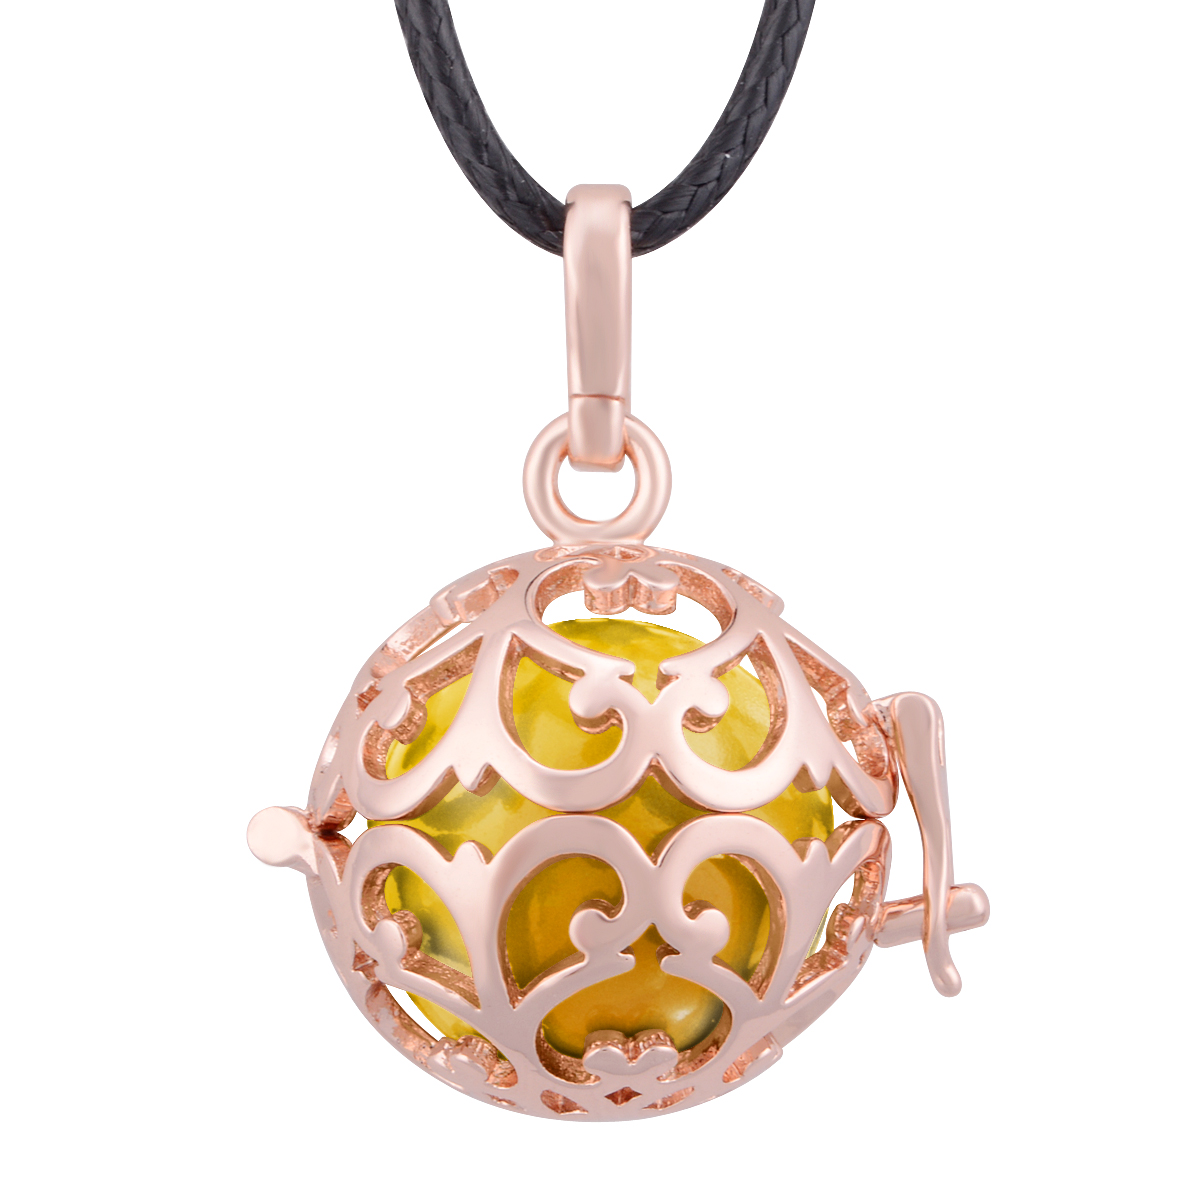 Merryshine Jewelry Rose Gold Cage Bell bola pendant Pregnancy wax leather necklace Musical Bola Angel Caller Pendants